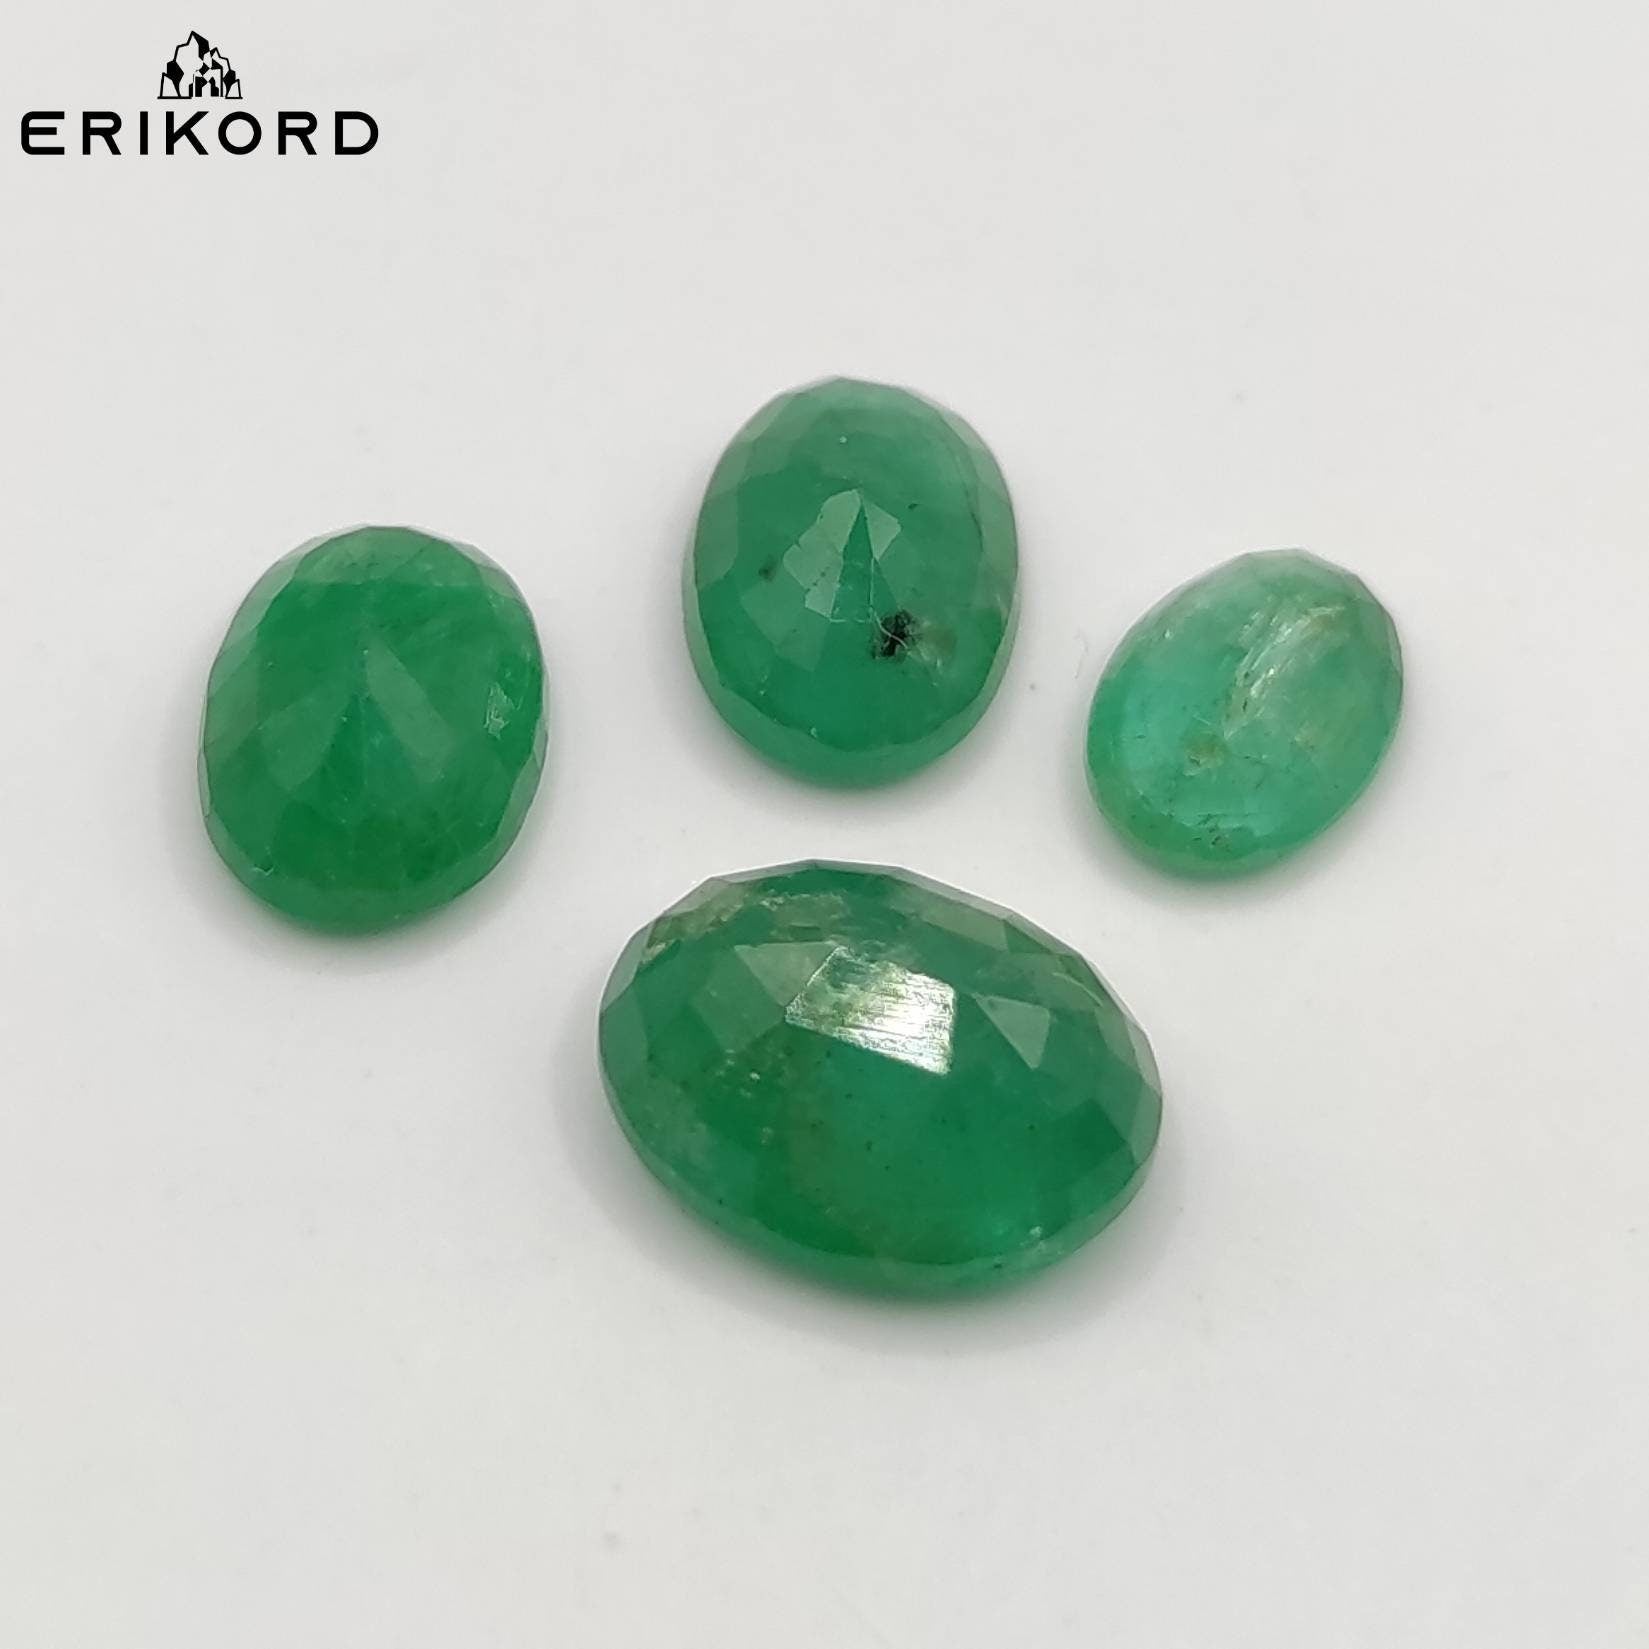 5.60ct Lot of Emerald Green Emerald Zambian Emeralds Loose Gems Untreated Emerald Faceted Oval Cut Gemstone Ring Earrings Cut Gems Polished